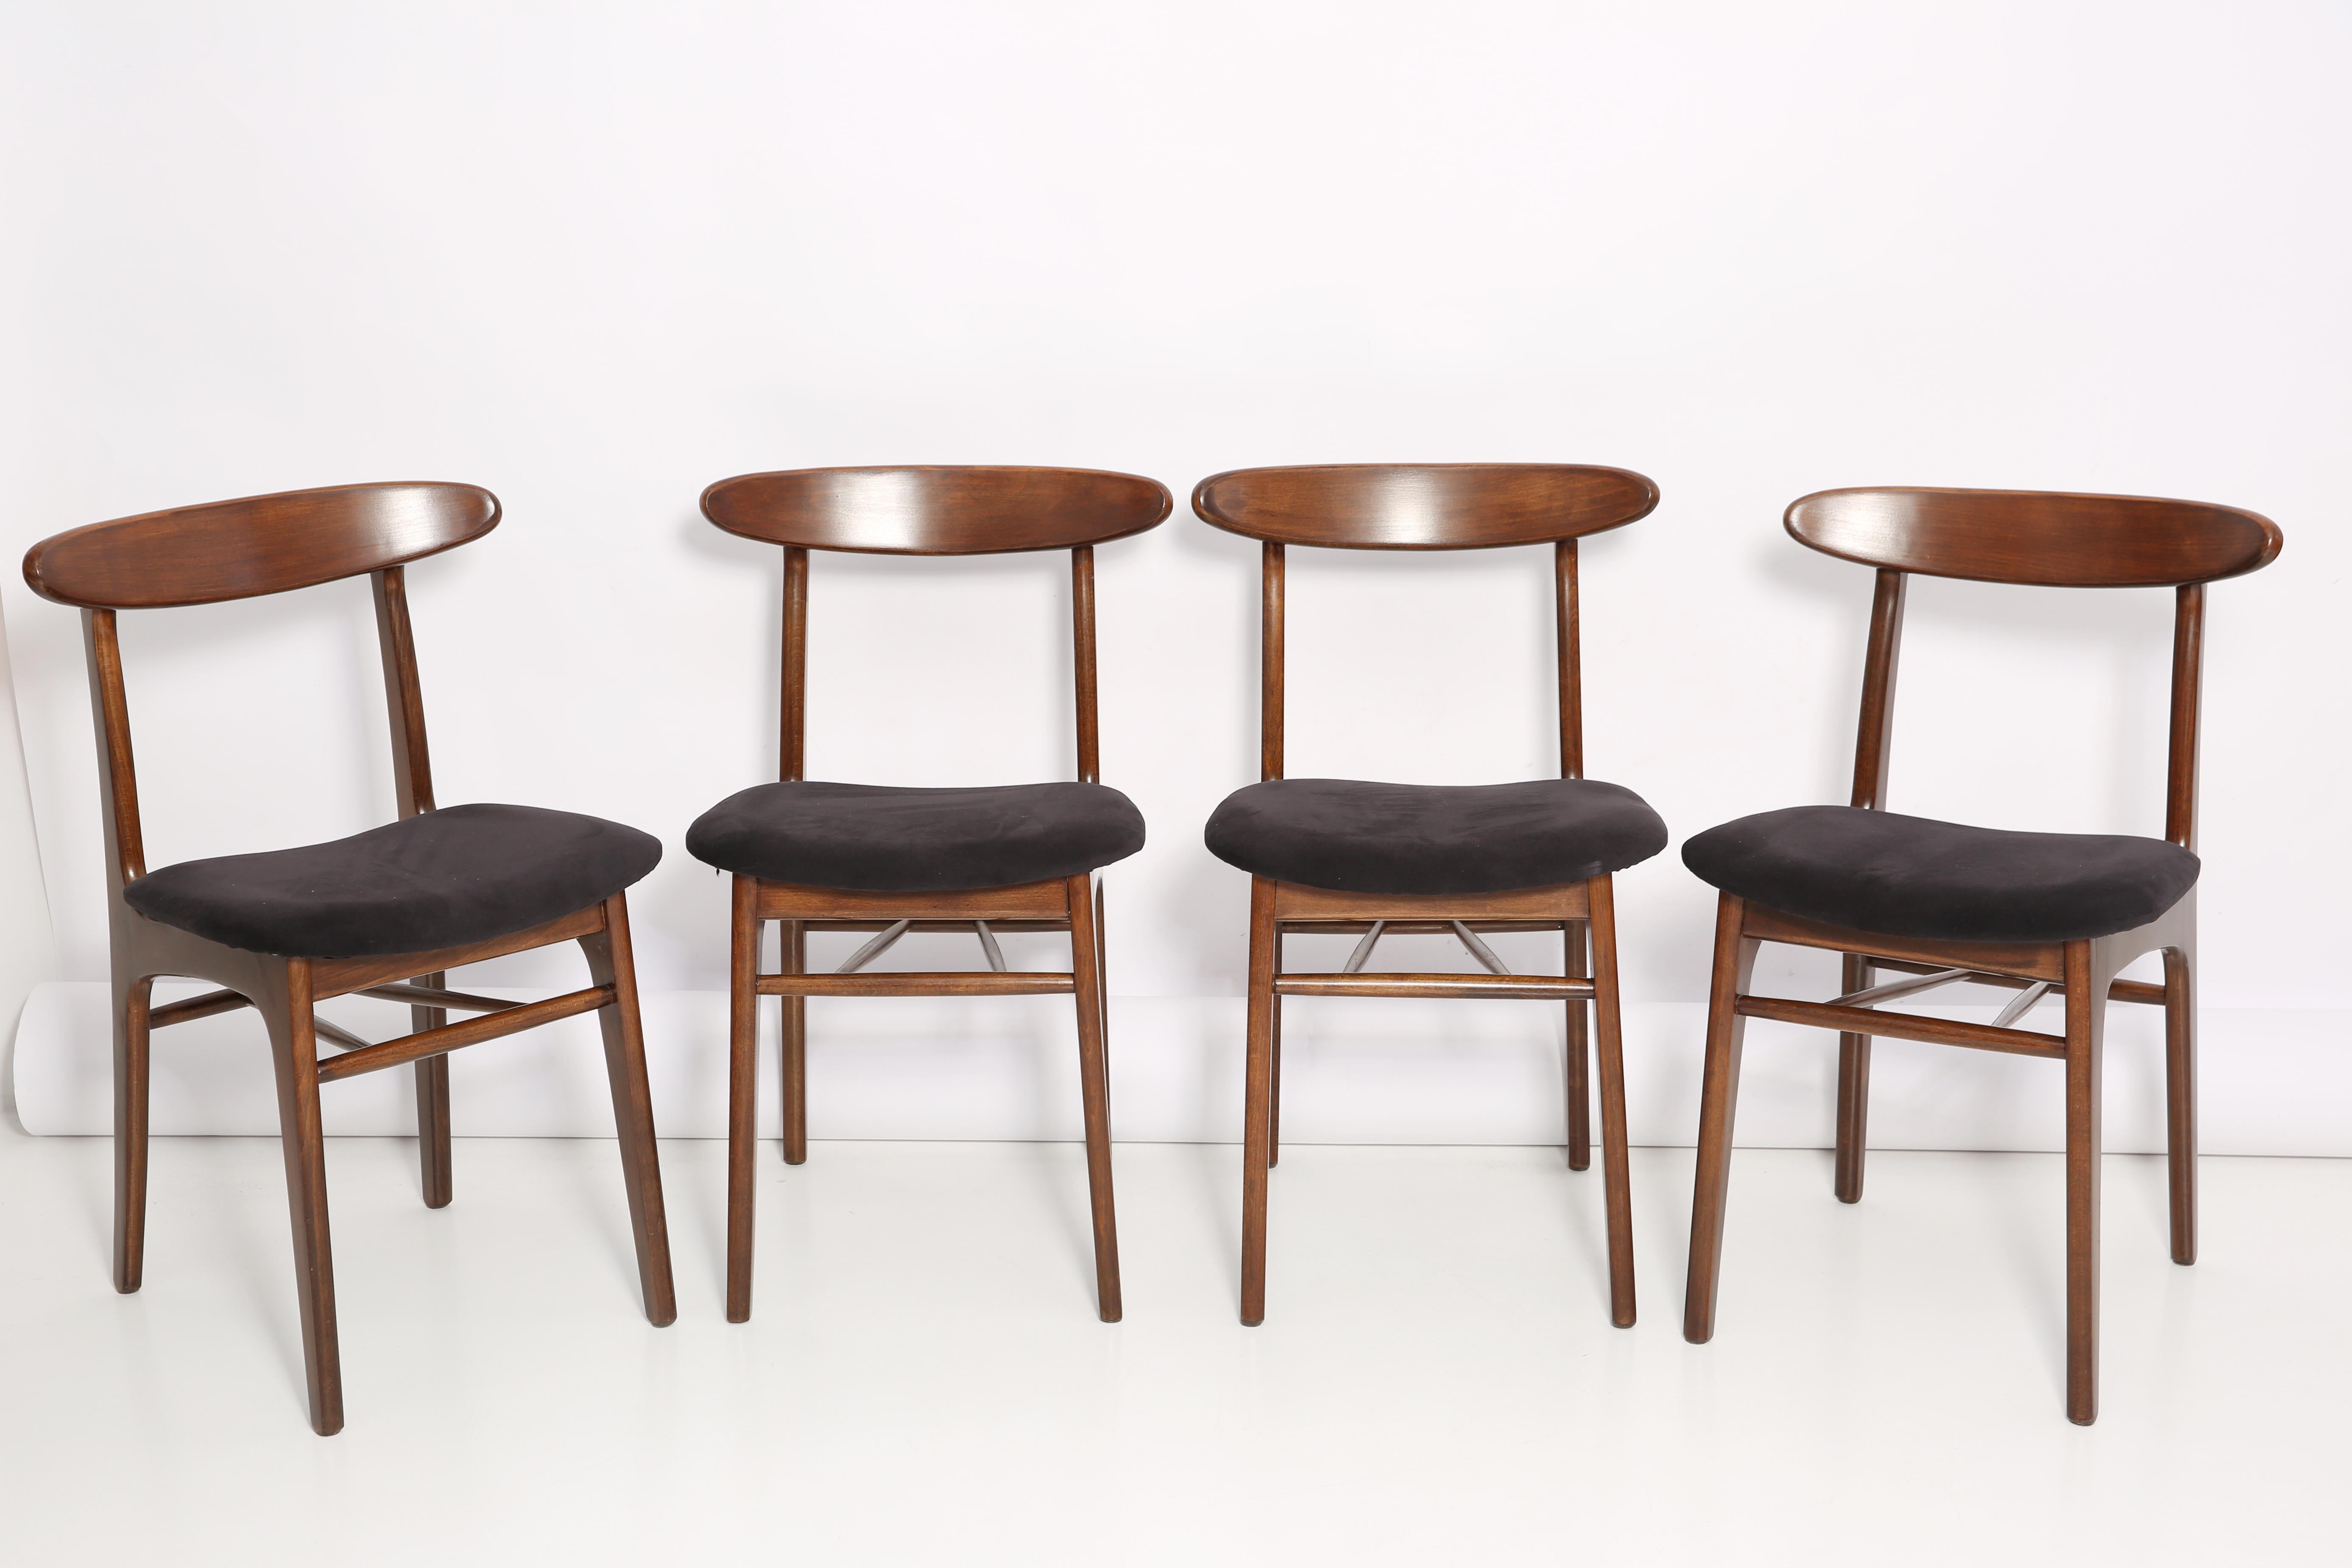 Chairs designed by Prof. Rajmund Halas. Made of beechwood. The set is after a complete upholstery renovation, the woodwork has been refreshed. Seat is dressed in black, durable and pleasant to the touch velvet fabric. Chair is stabile and very